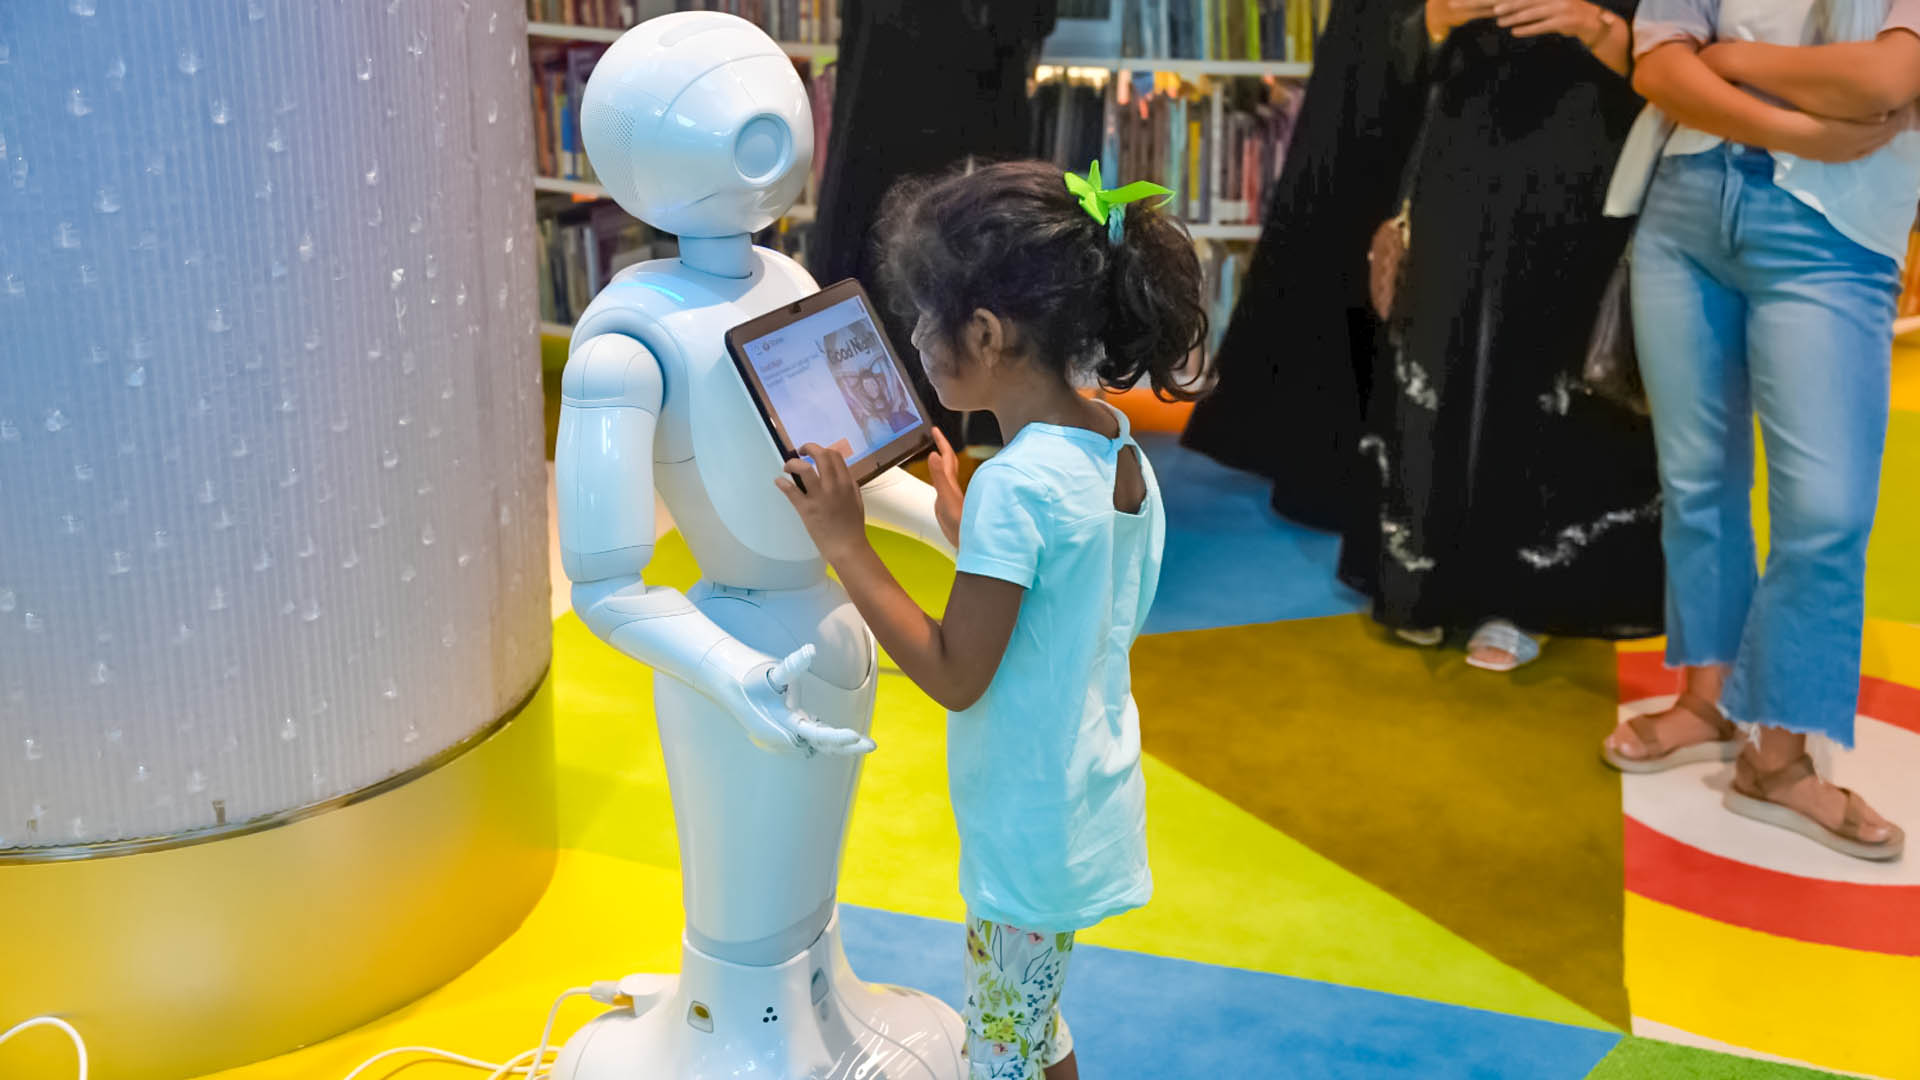 Mohammed bin Rashid Library is first in the Middle East to utilize AI and robots